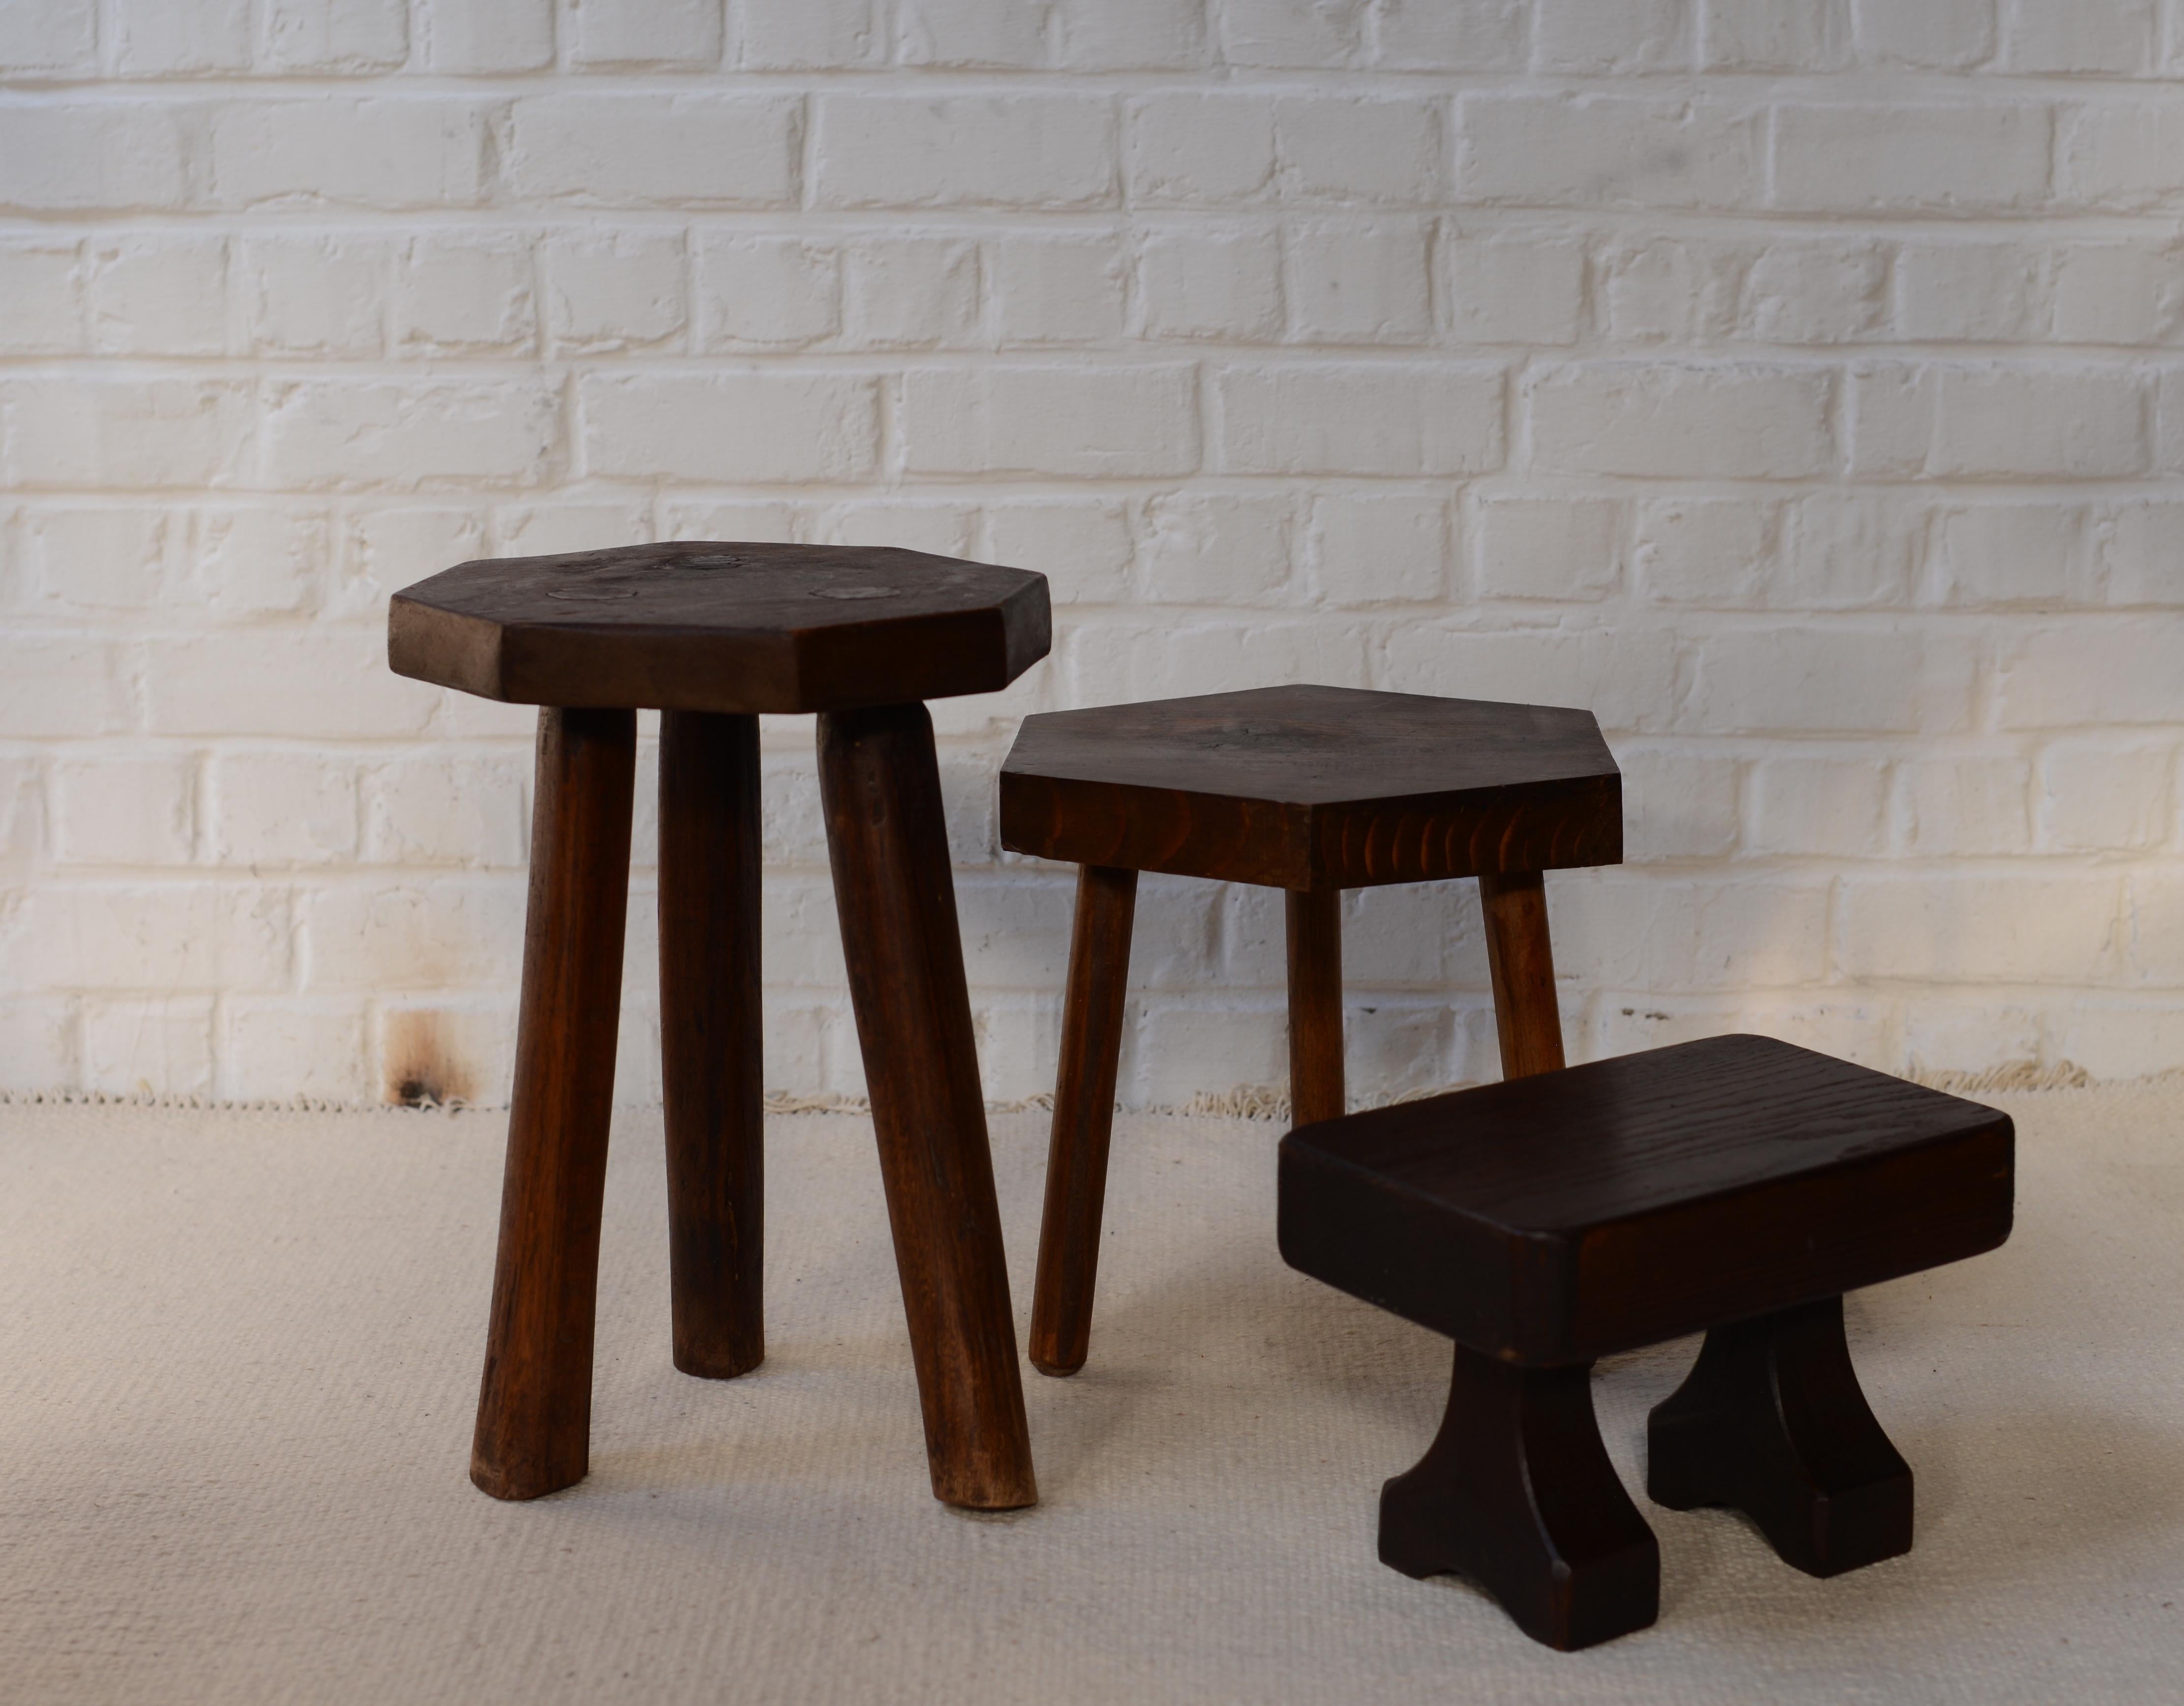 20th Century French Stained Wooden Stool circa 1950 Brutalist